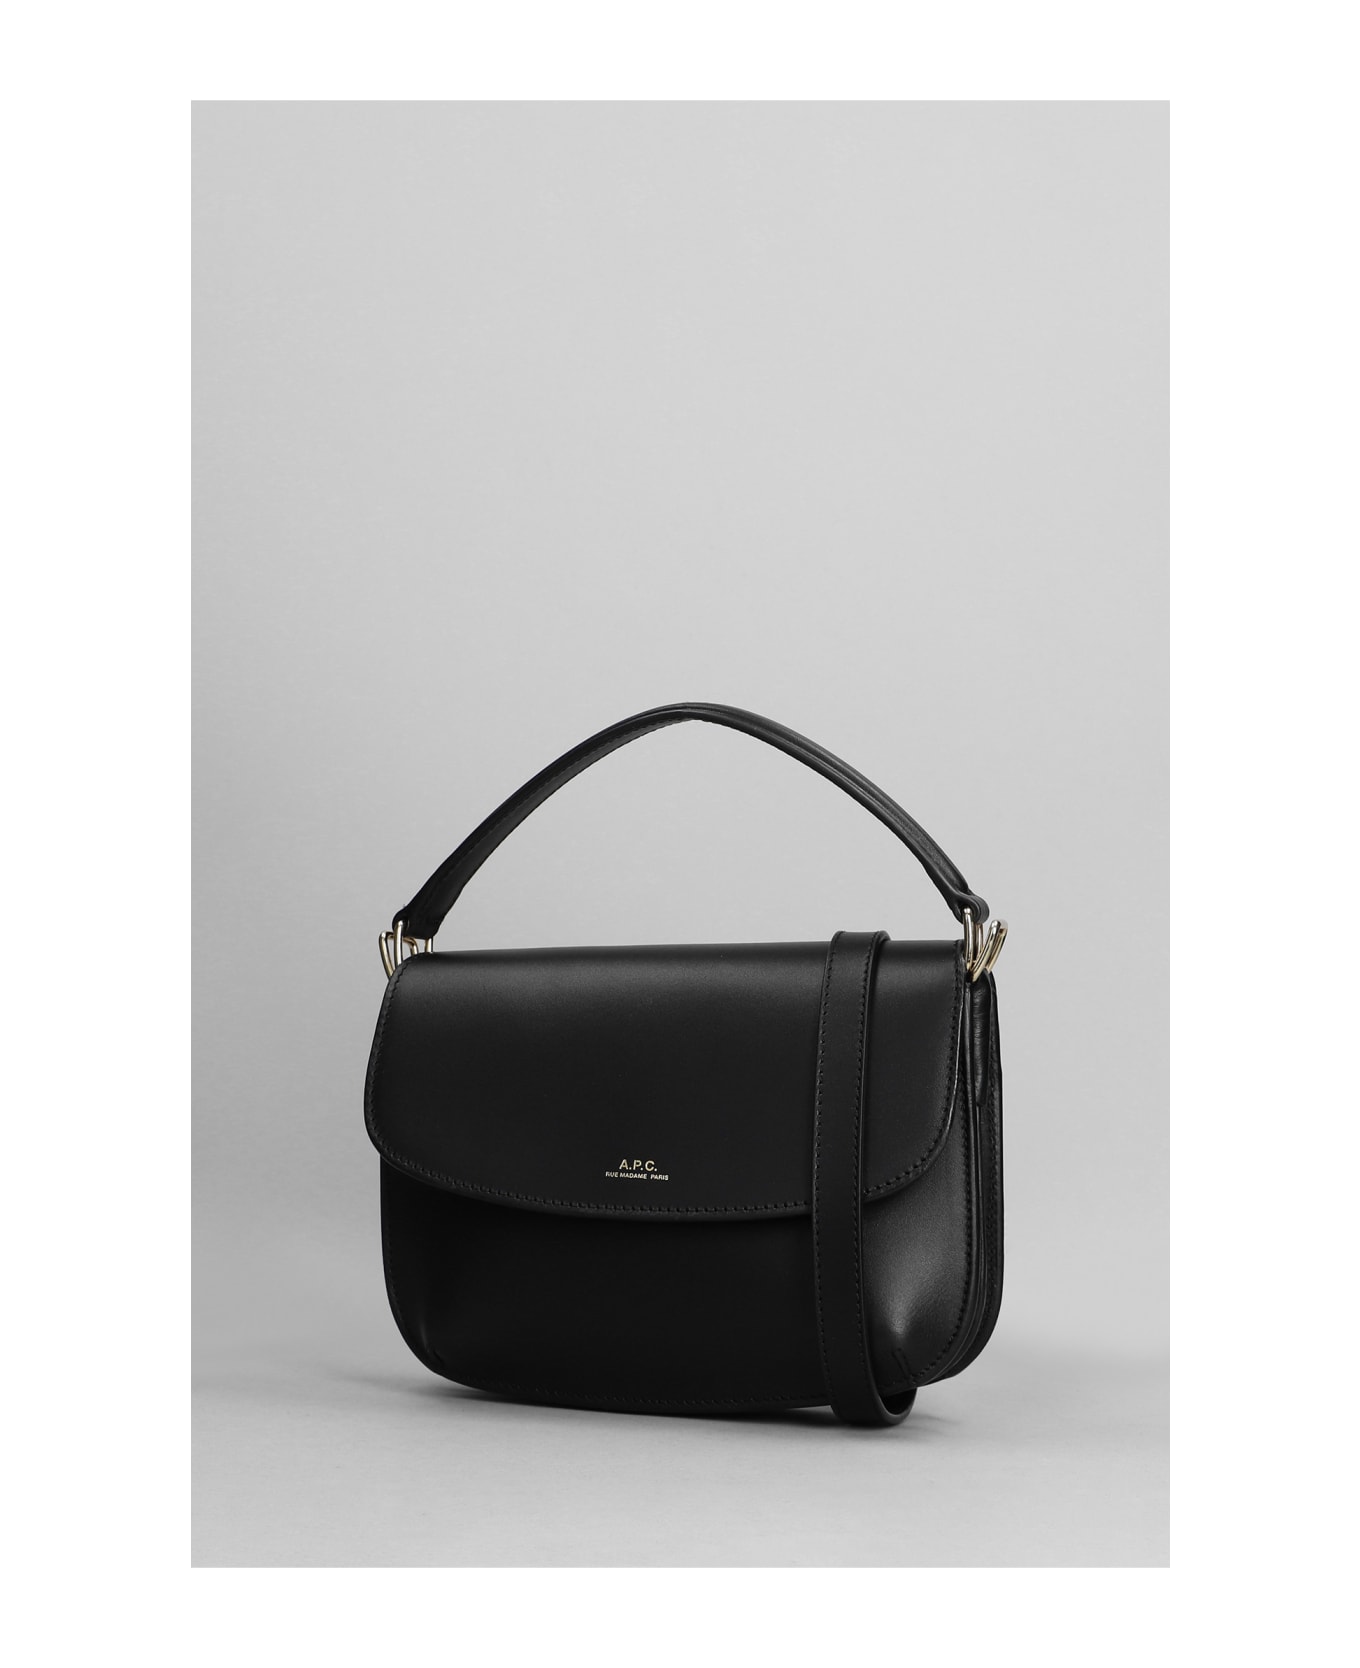 A.P.C. Sarah Hand Bag In Black Leather - Lzz Black